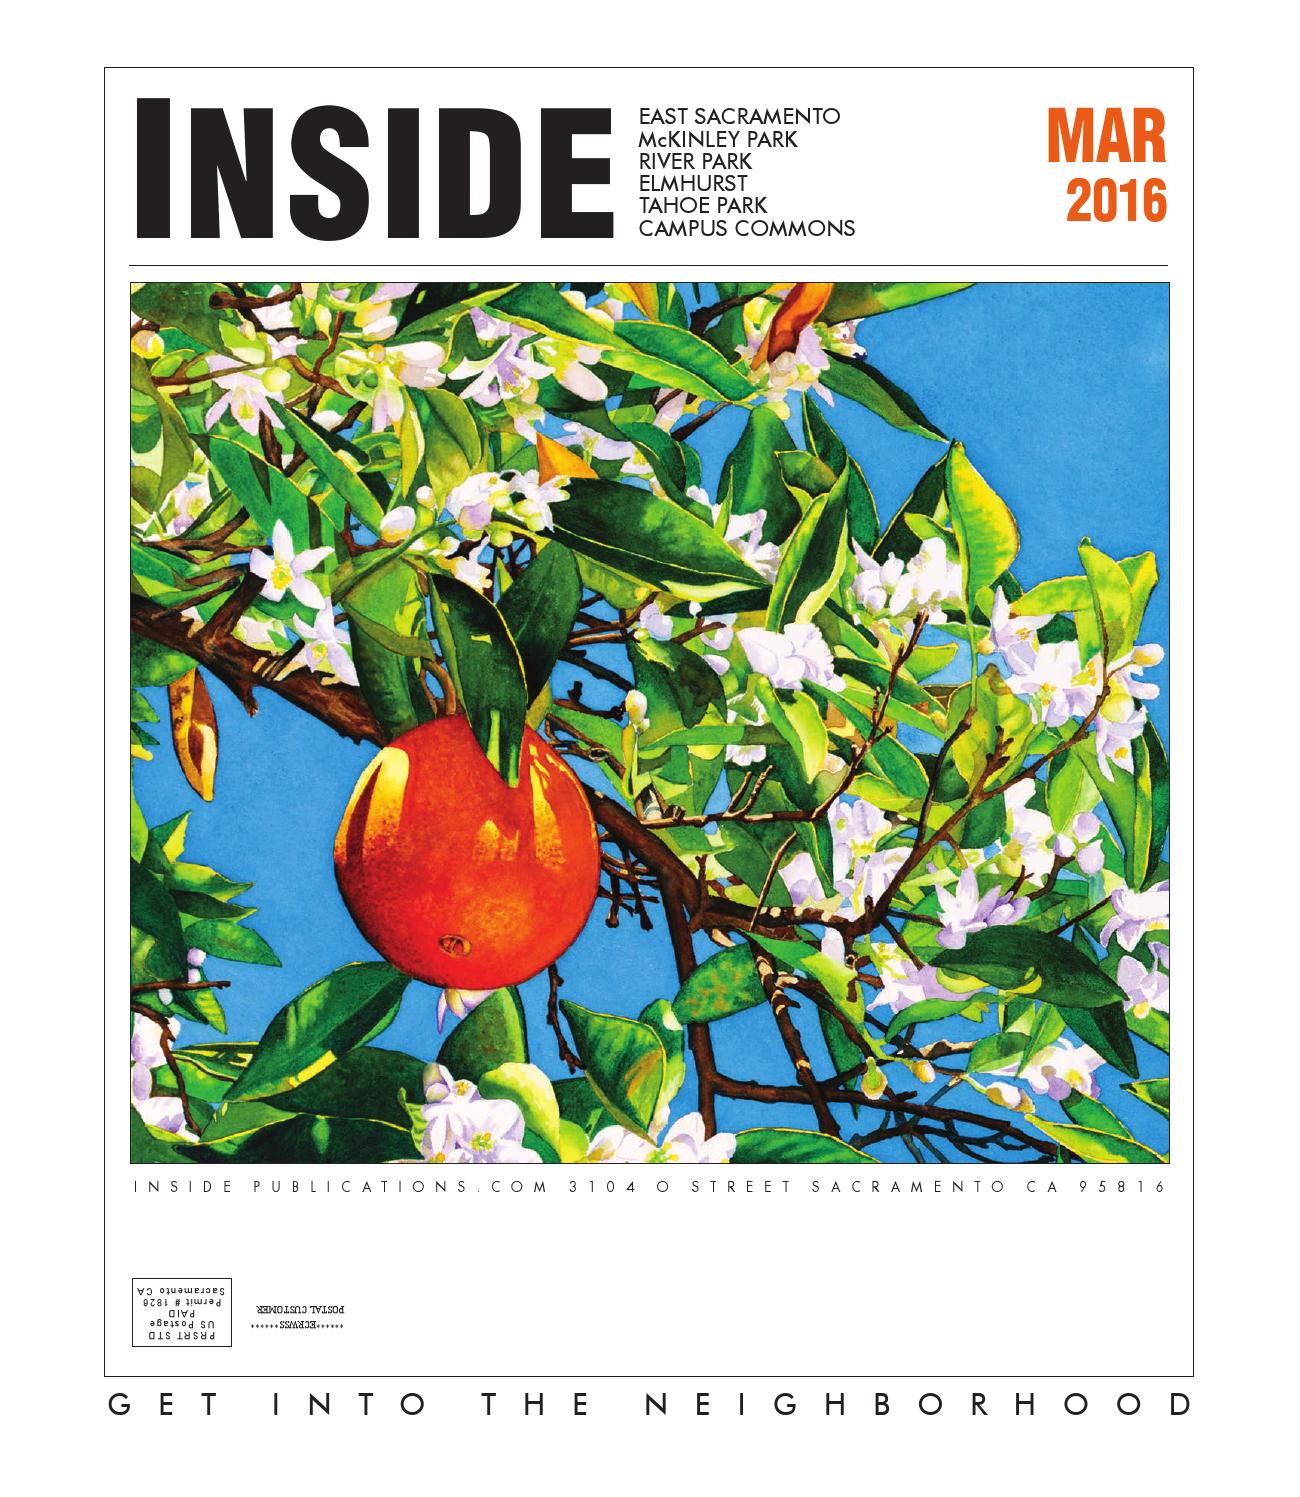 Fireplace and Fixins Best Of Inside East Sacramento March 2016 by Inside Publications issuu